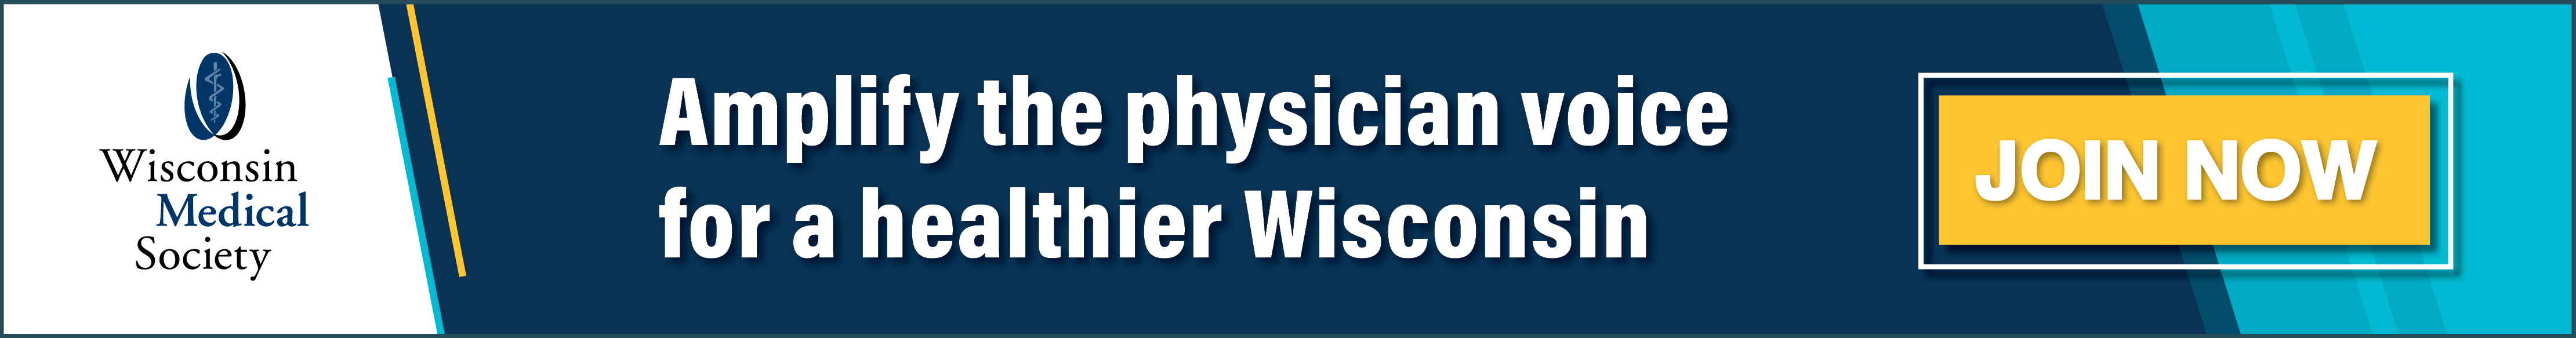 Click here to join the Wisconsin Medical Society